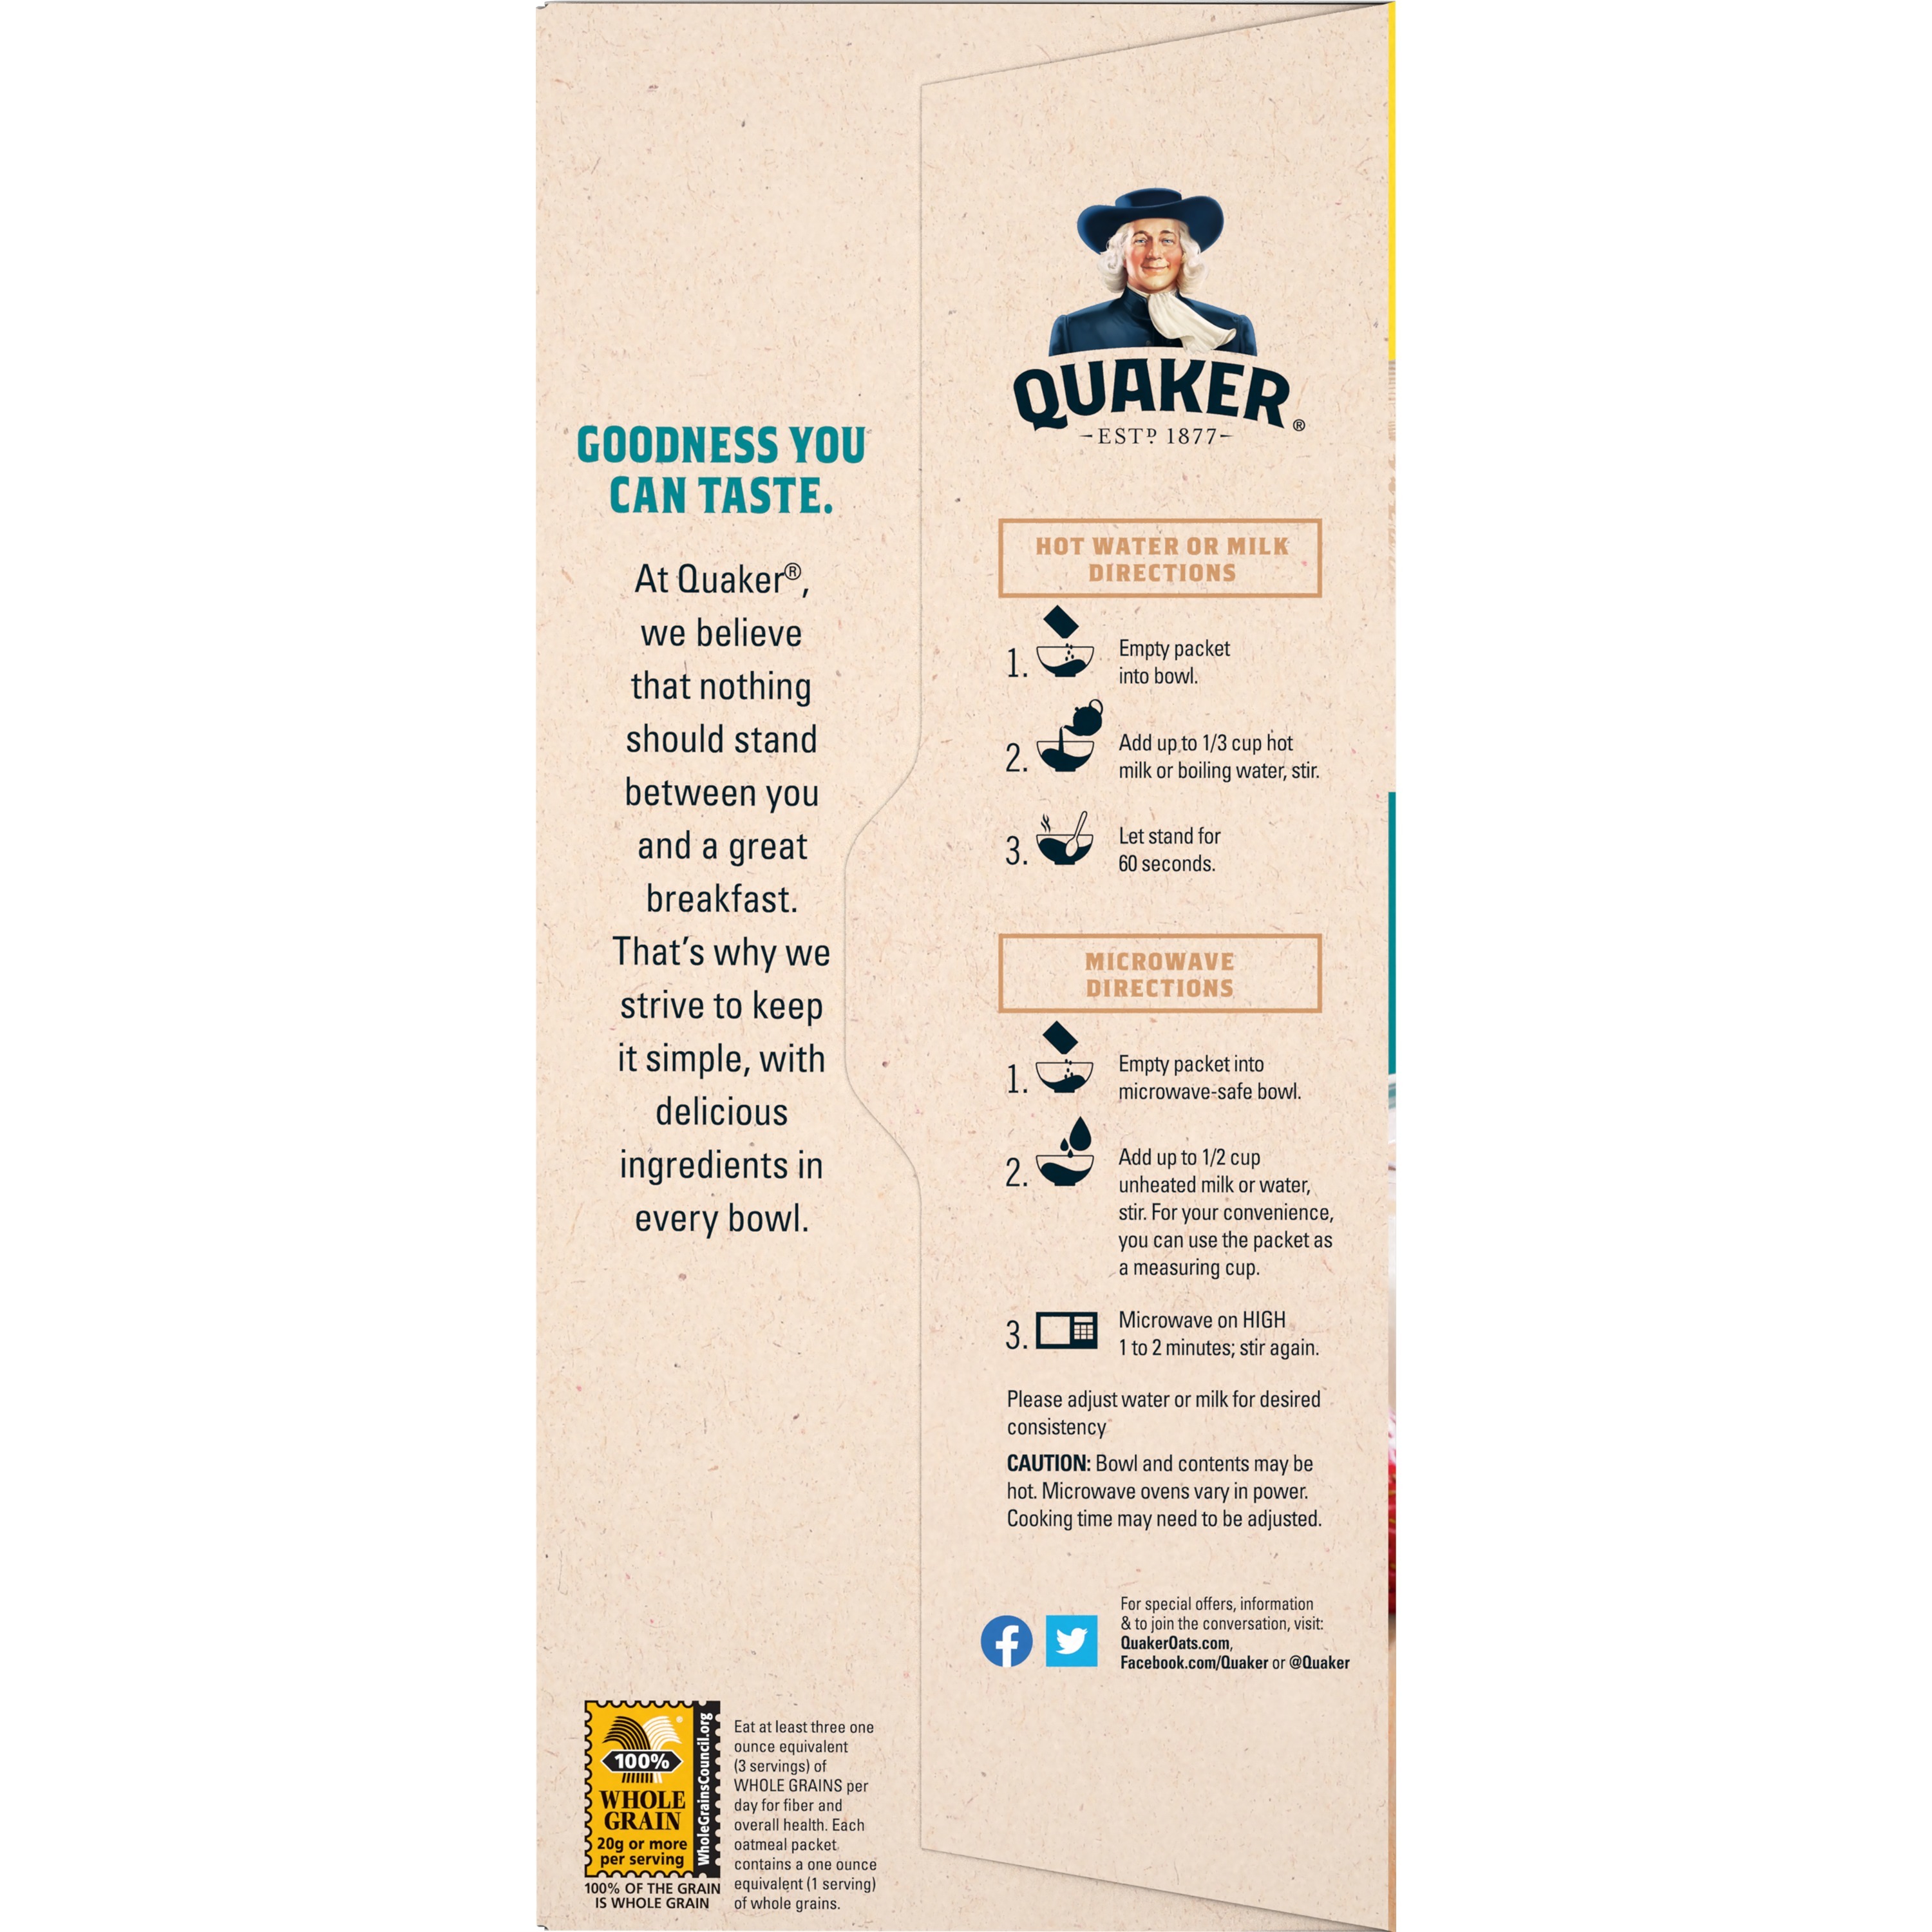 Quaker Instant Oatmeal, Fruit & Cream Variety Pack, Quick Cook Oatmeal, 1.1 oz Packets, 20 Pack - image 6 of 12